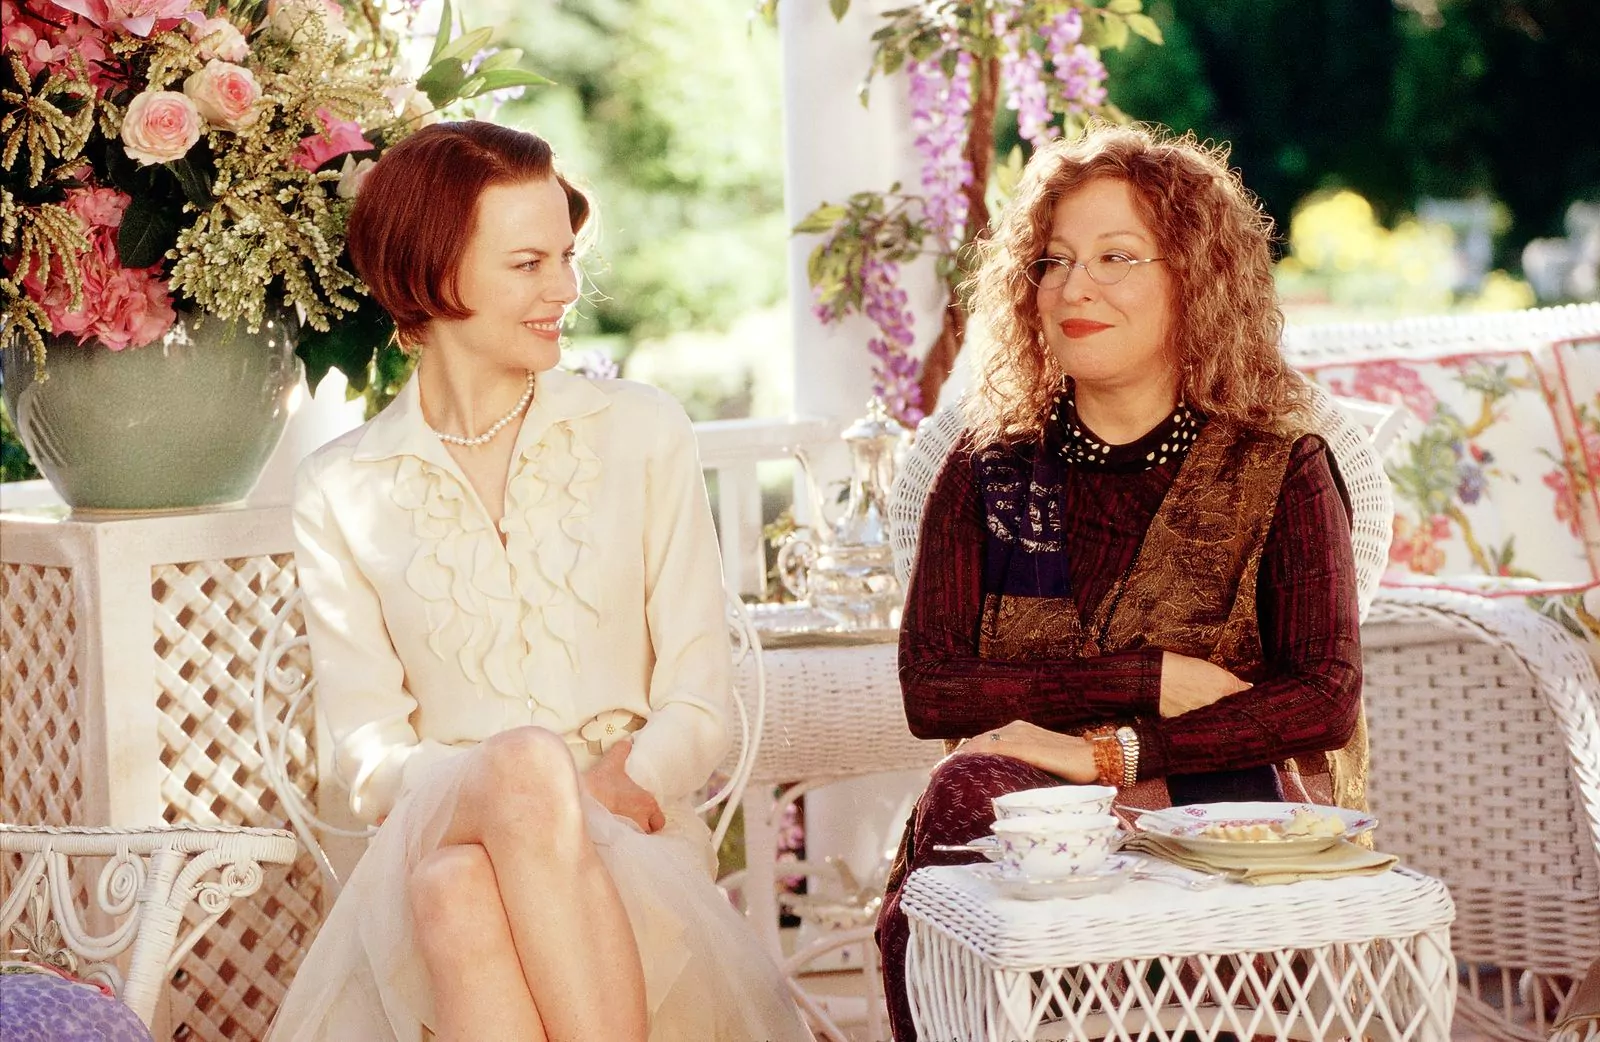 Nicole Kidman and Bette Midler in The Stepford Wives, 2004